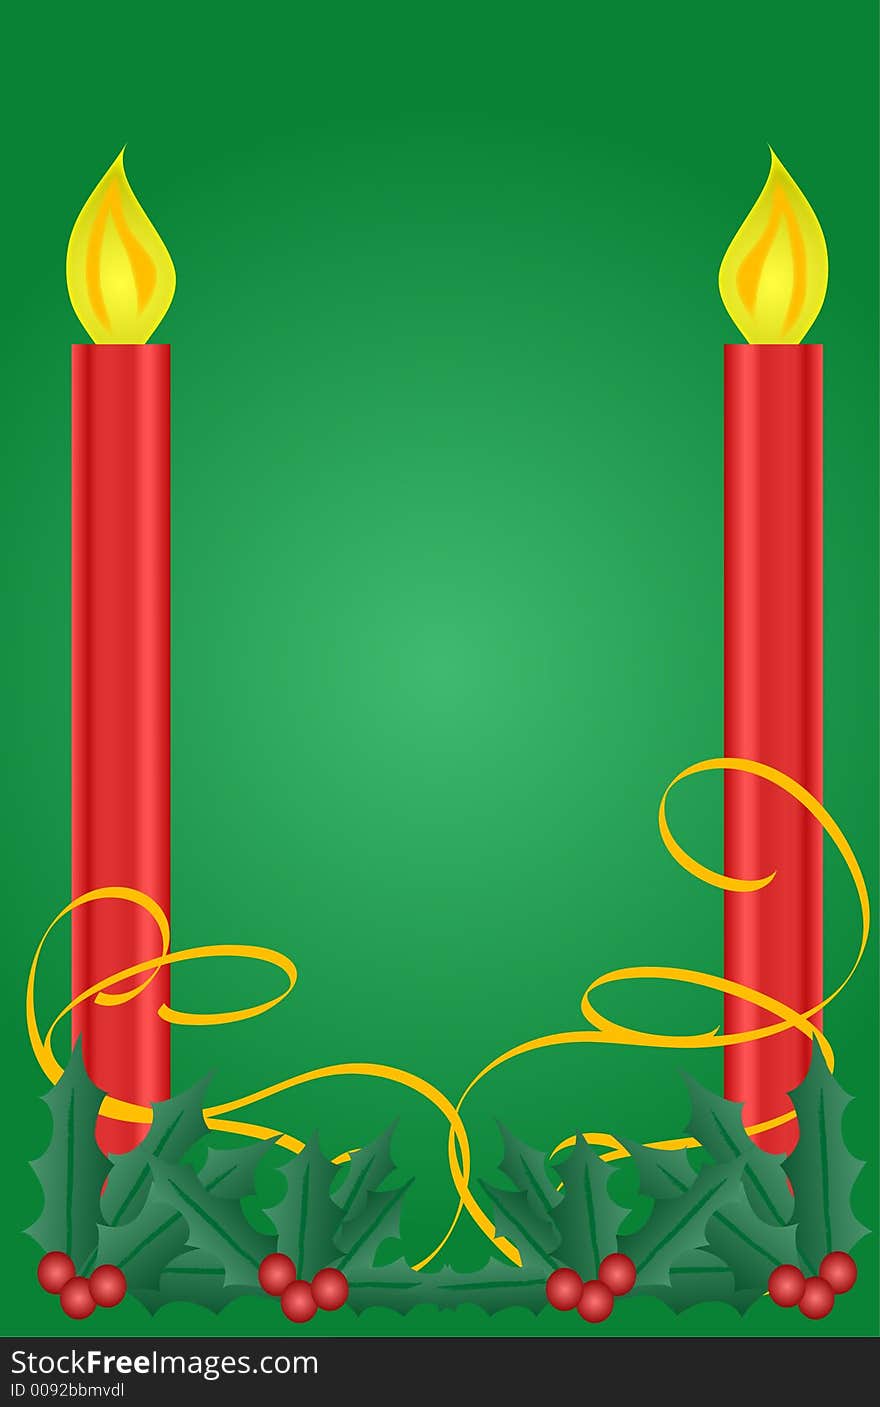 Two festive red holiday candles and holly frame a green background.Illustration.